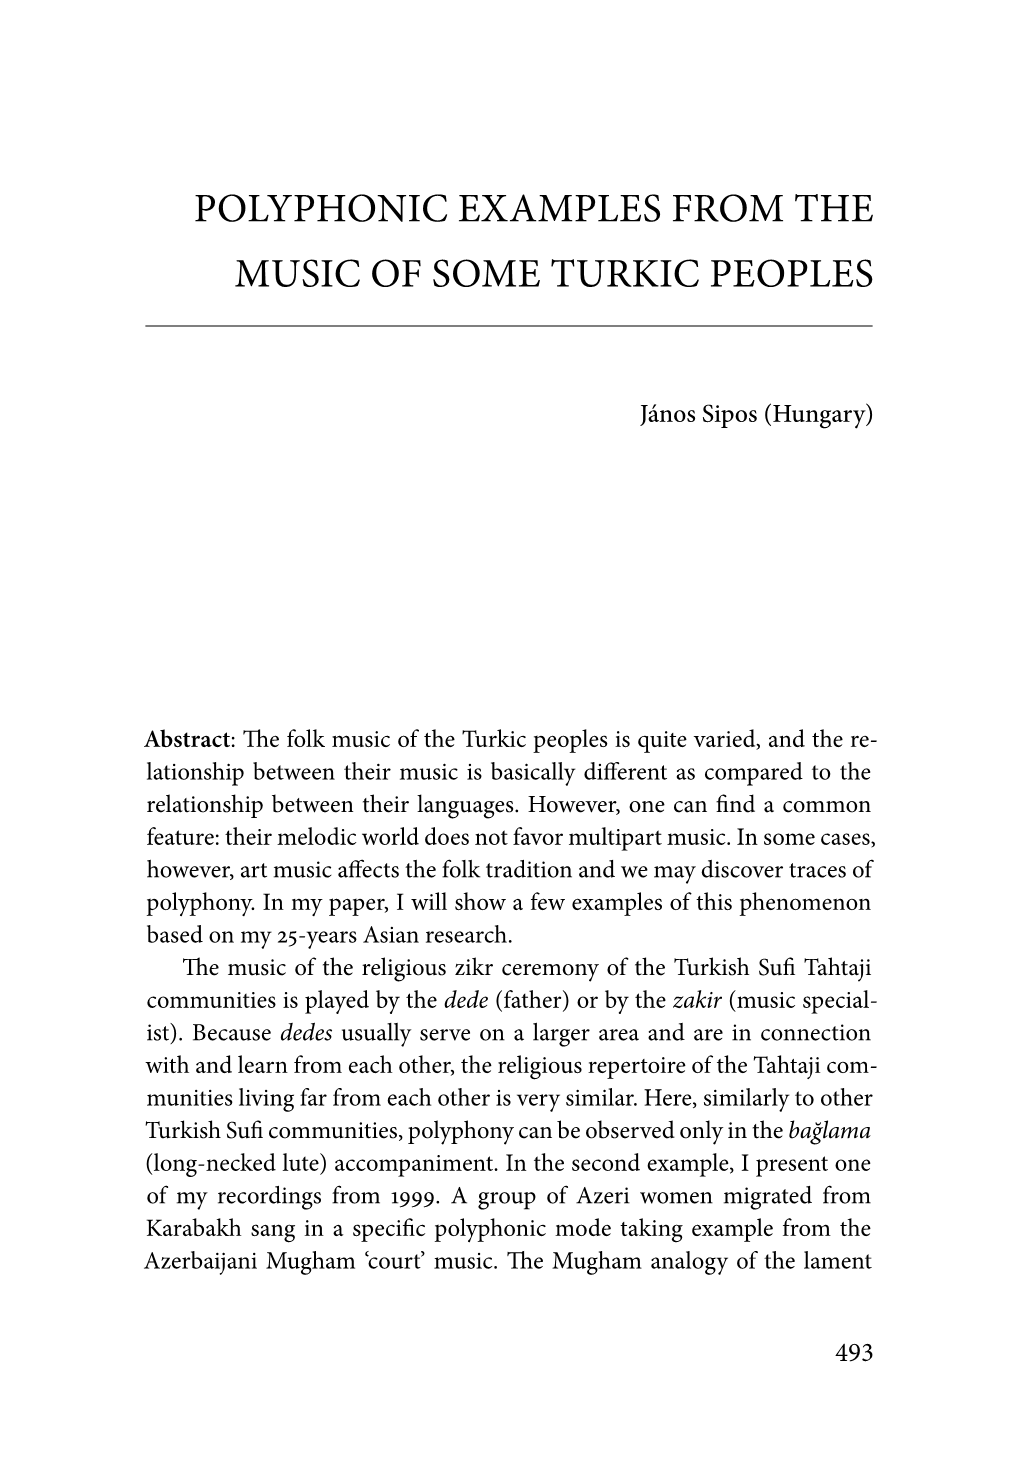 Polyphonic Examples from the Music of Some Turkic Peoples